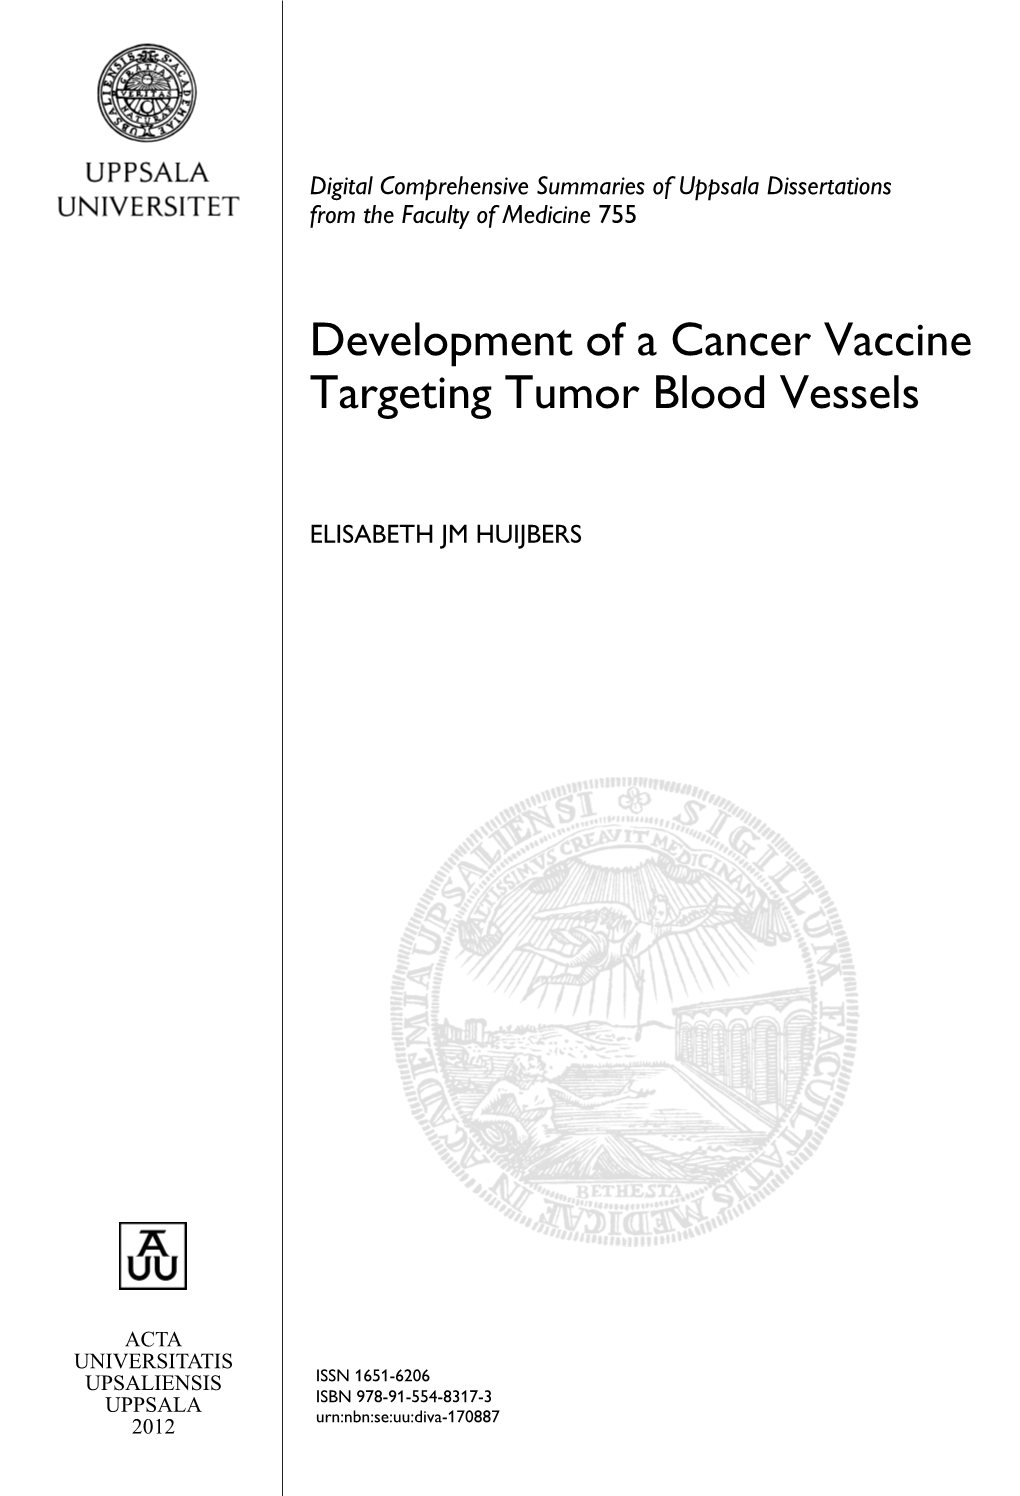 Development of a Cancer Vaccine Targeting Tumor Blood Vessels